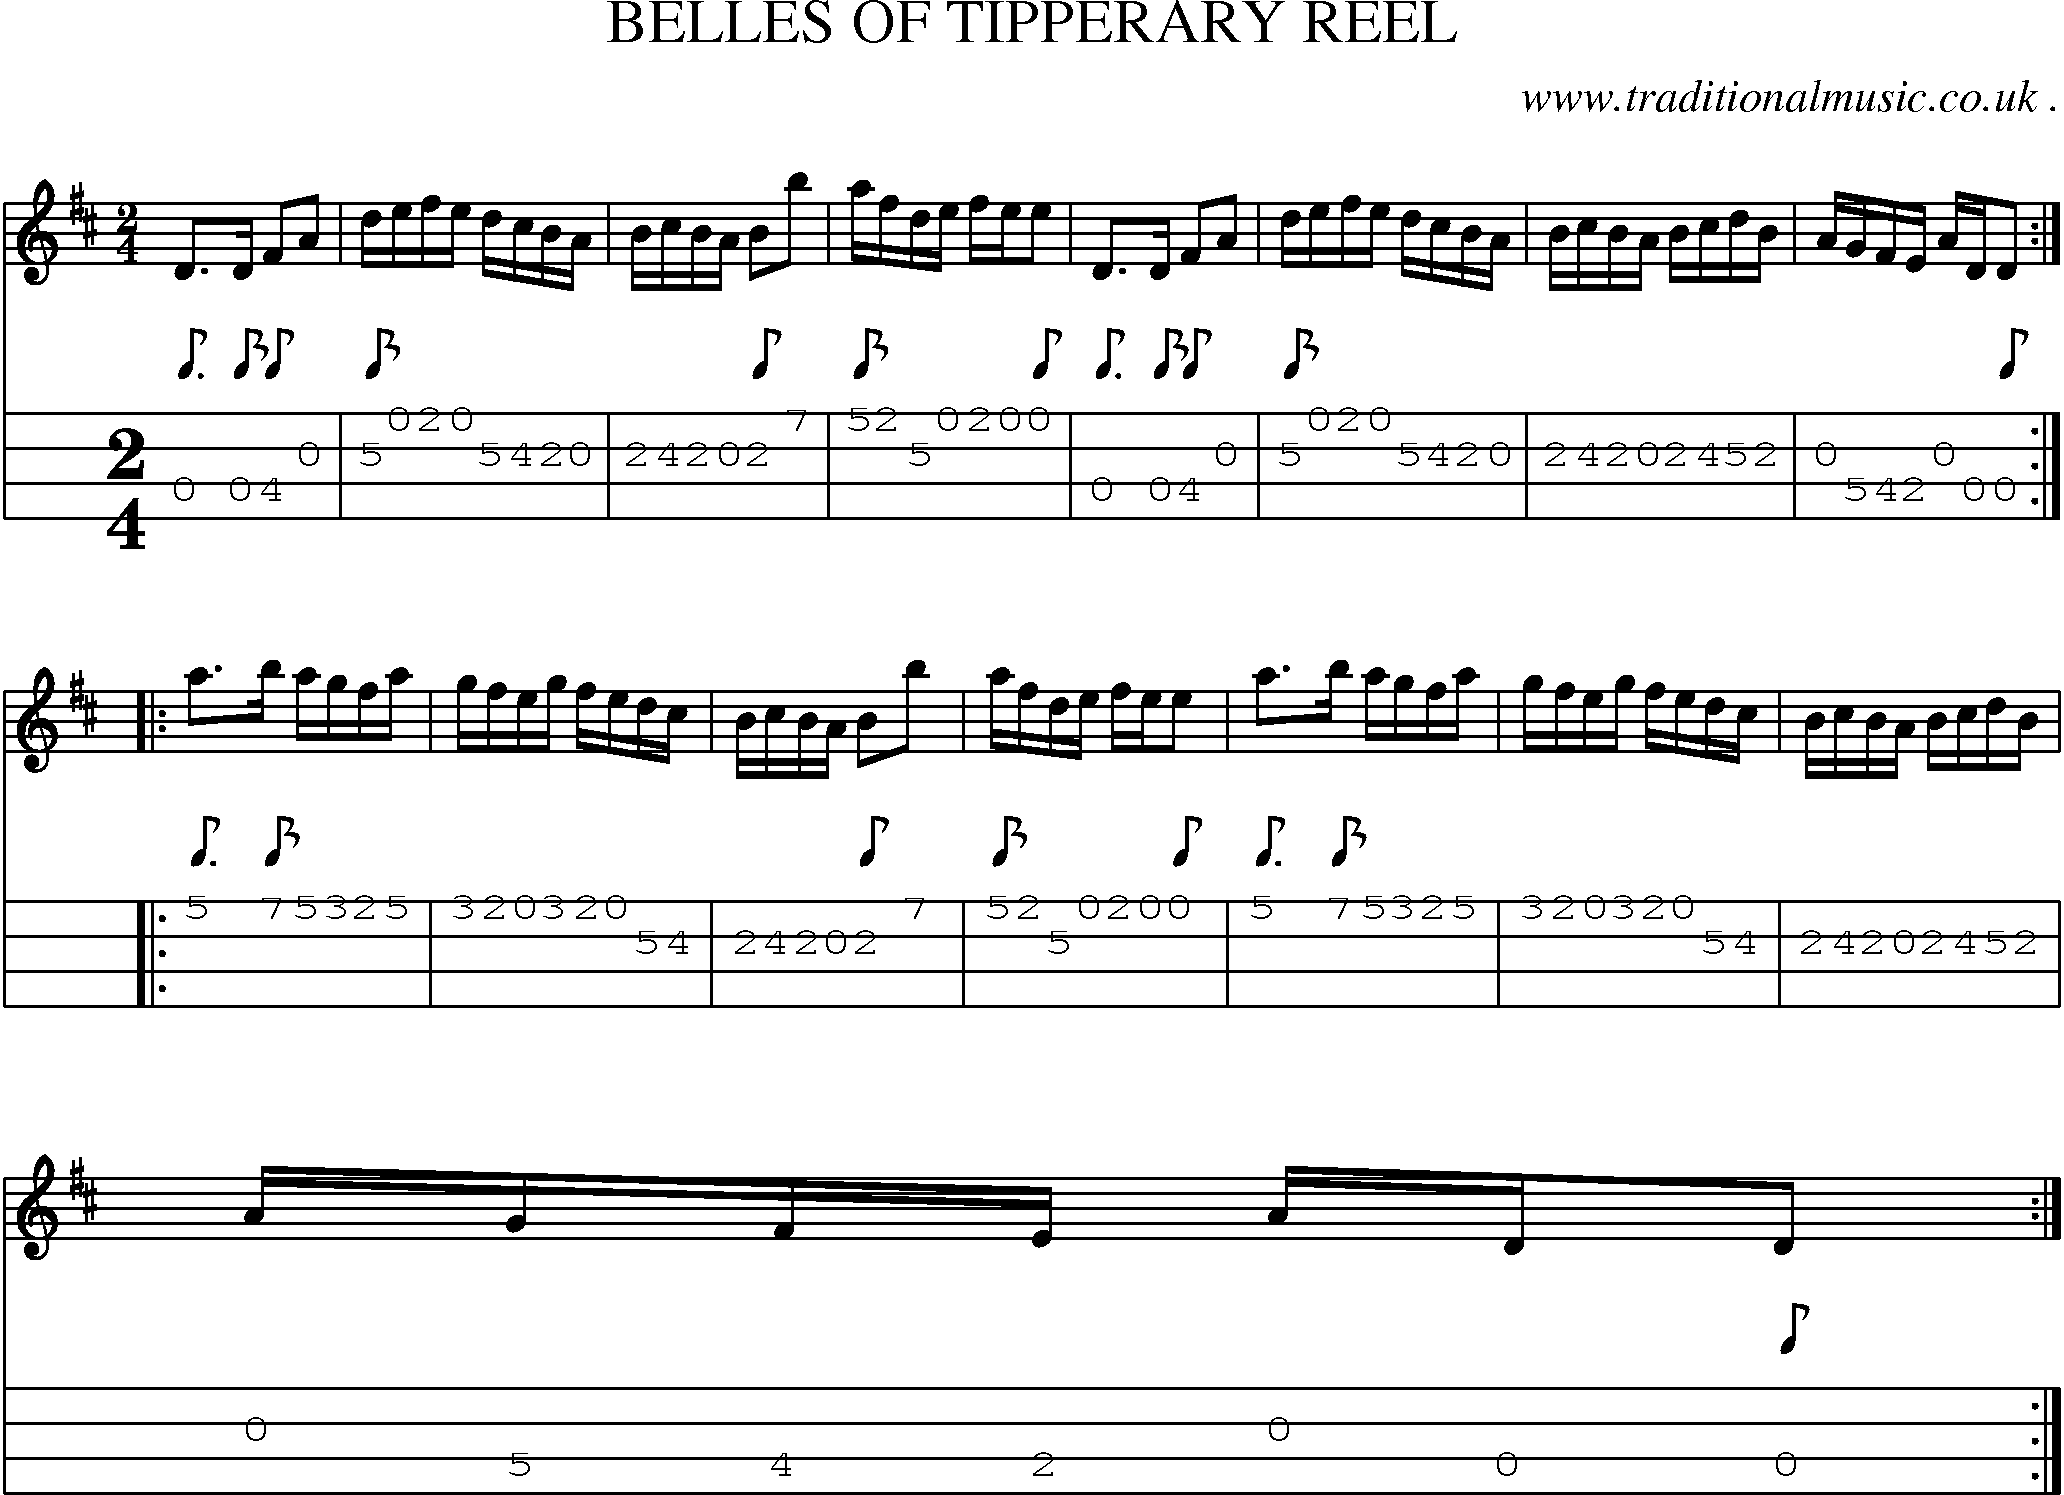 Sheet-Music and Mandolin Tabs for Belles Of Tipperary Reel